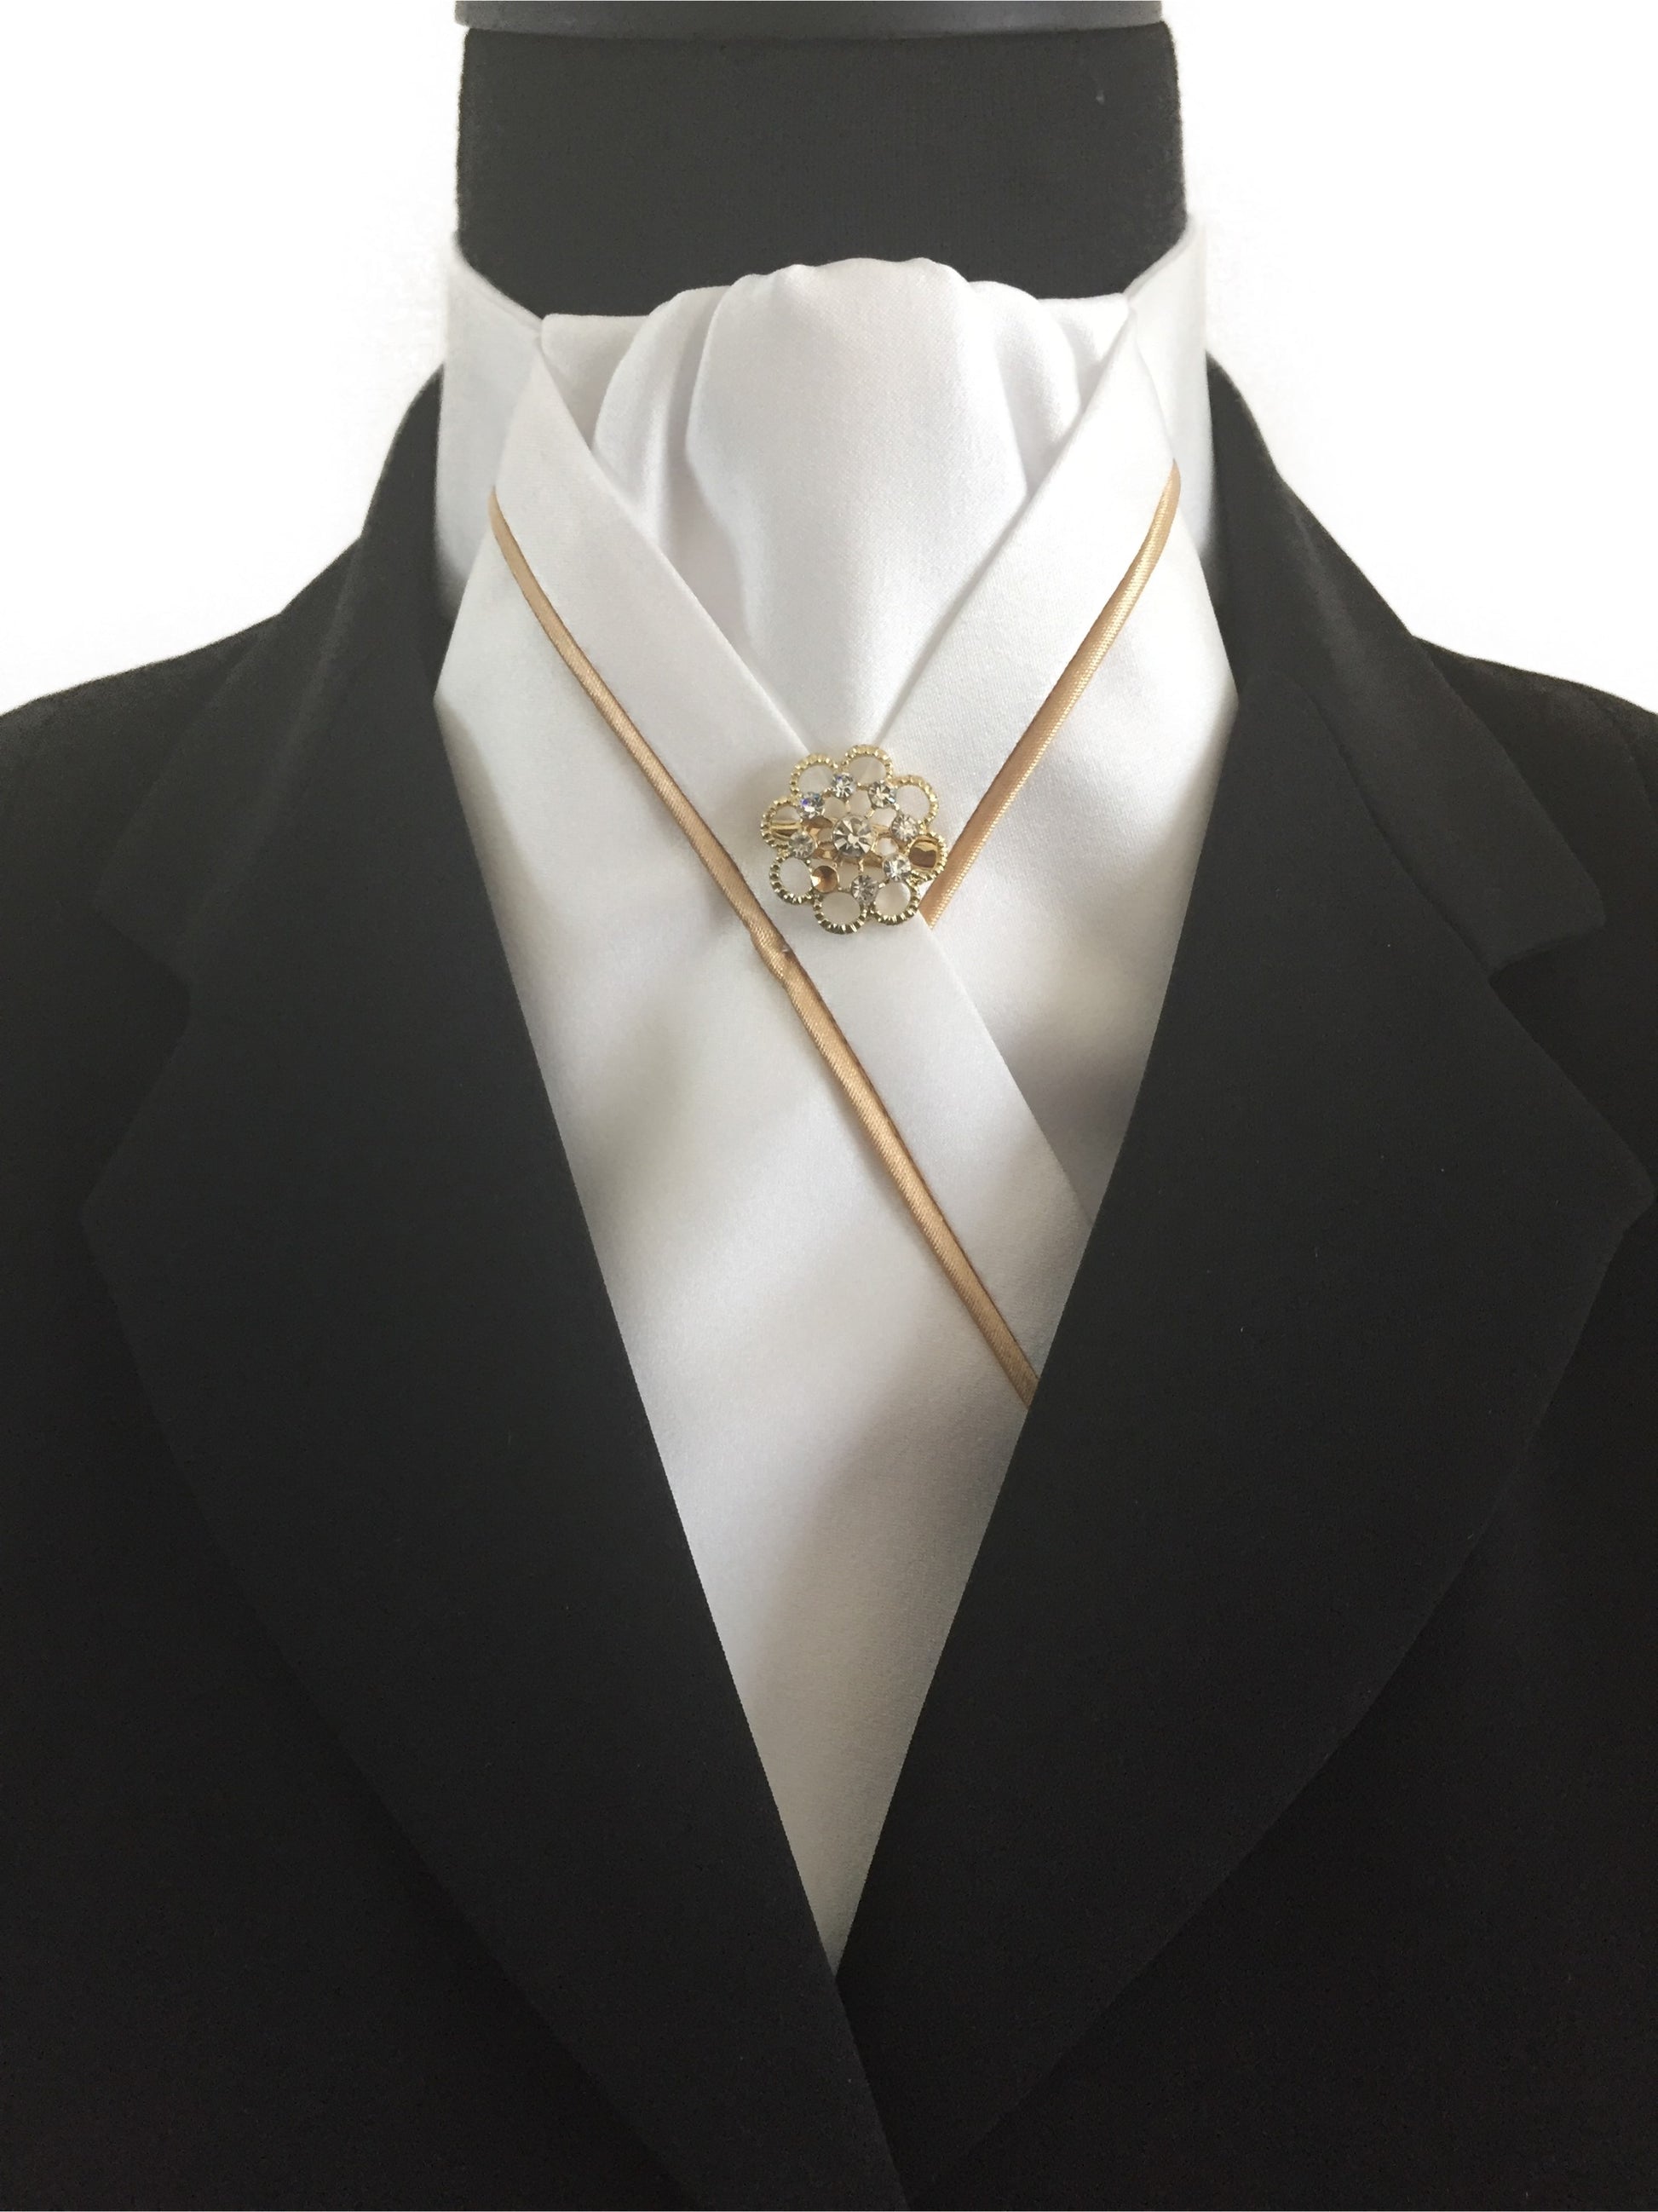 White Stock Tie with Gold Piping